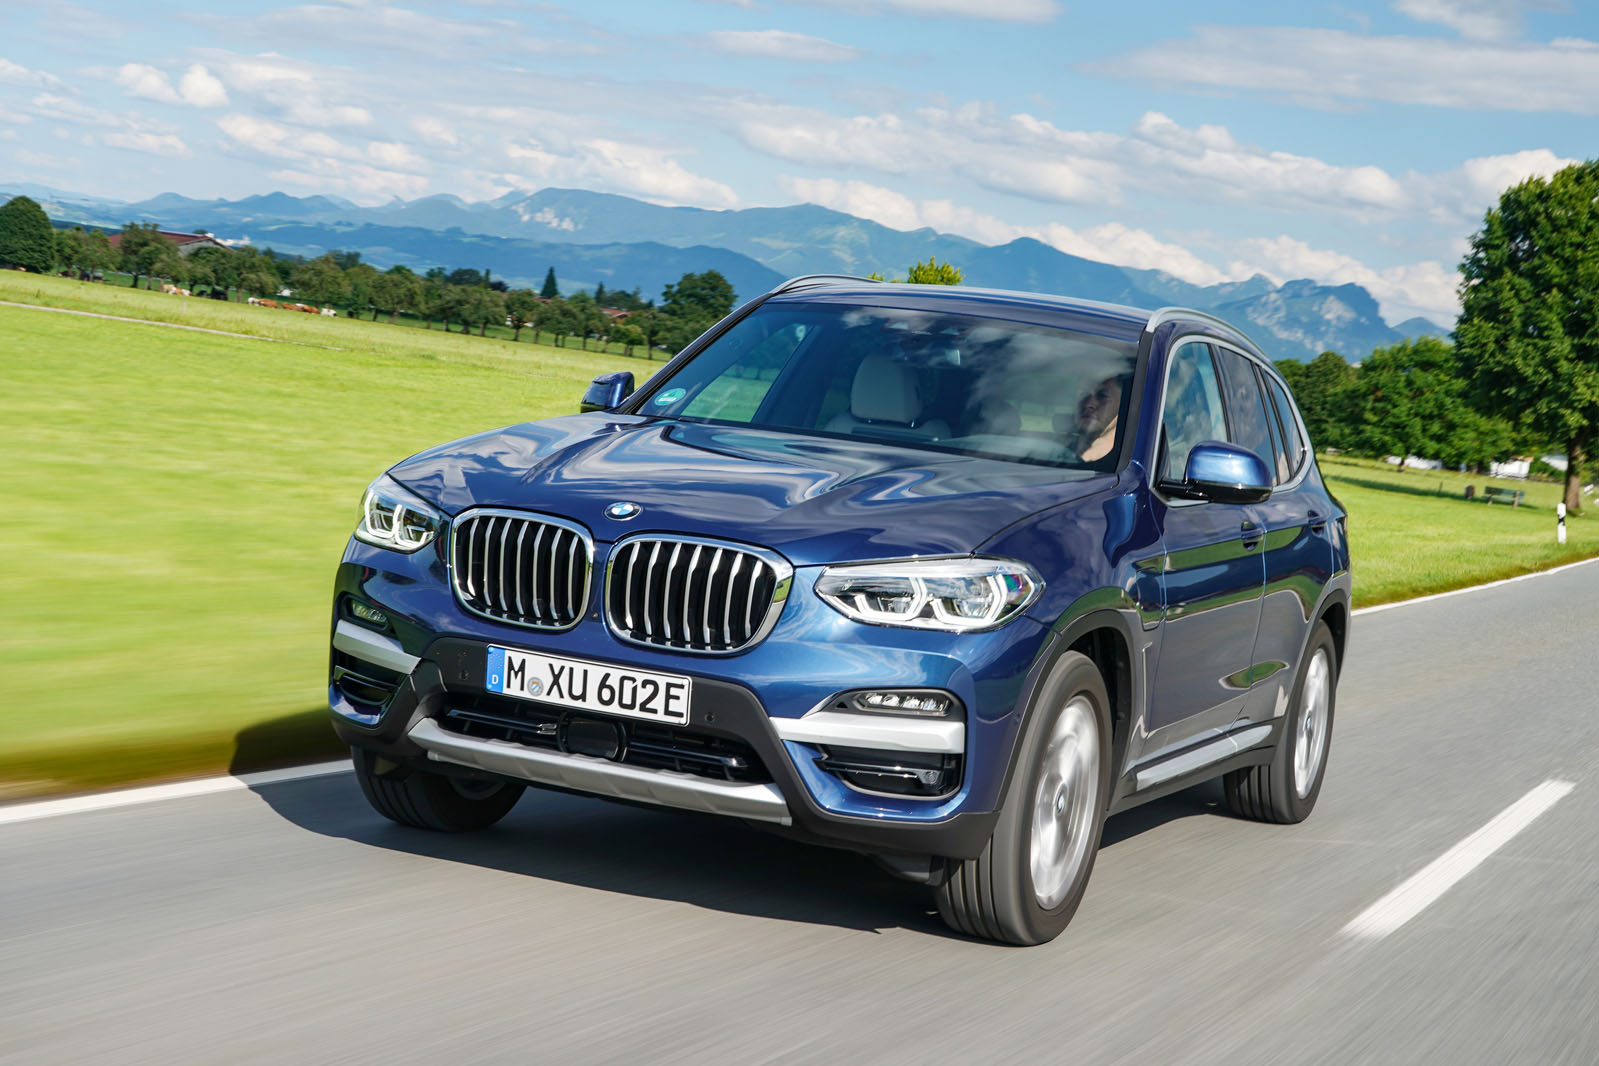 BMW X3 xDrive30e - BMW exploring new investments for the use of renewable energy in their production facilities